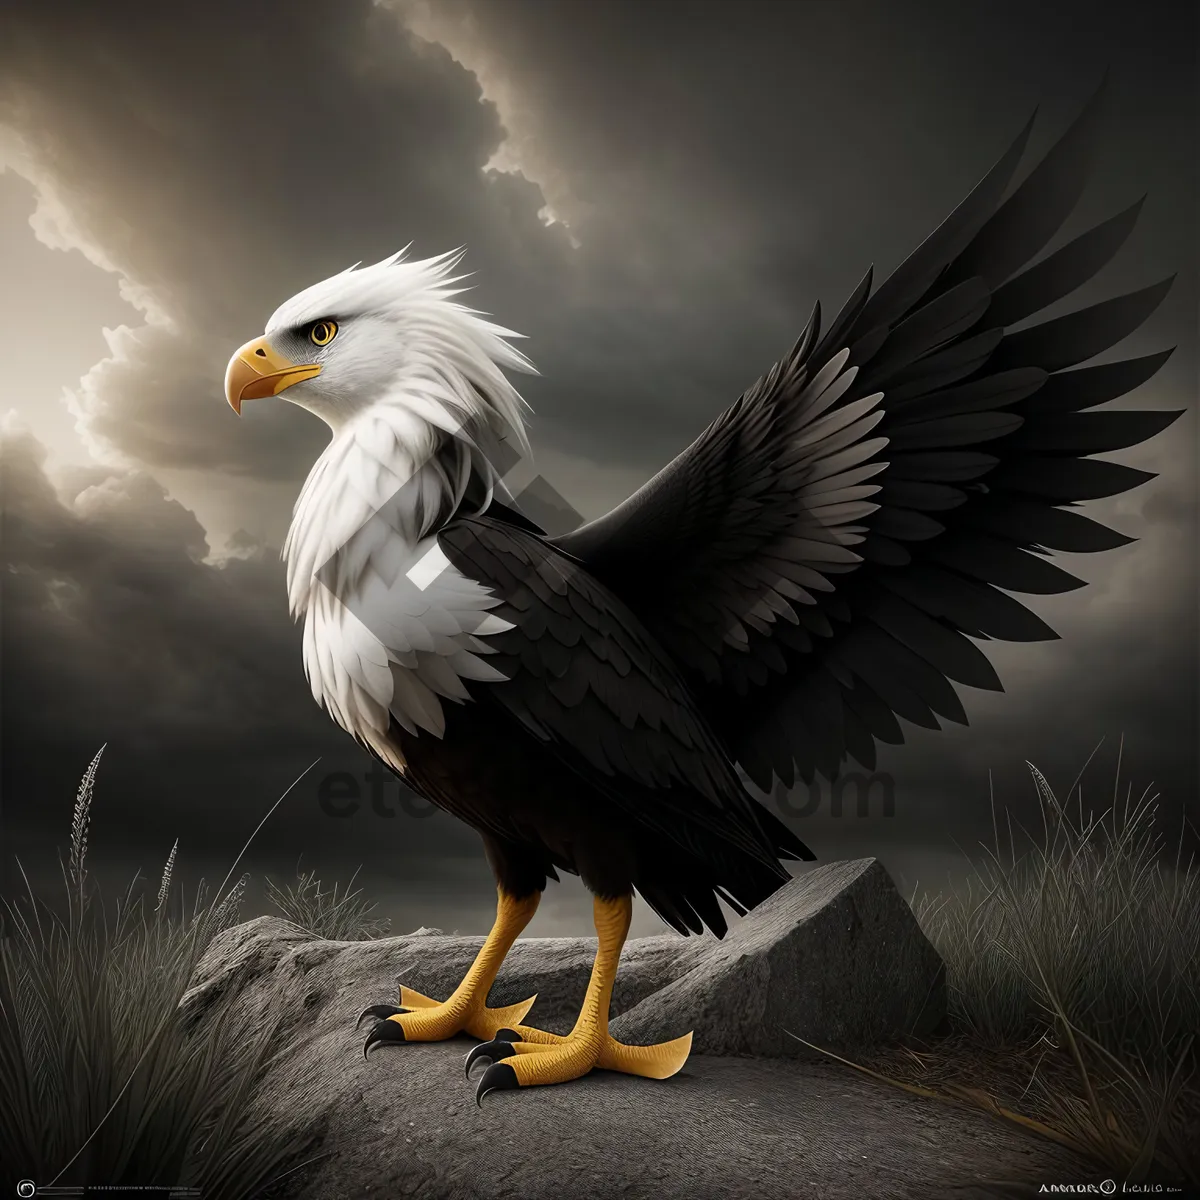 Picture of Majestic Bald Eagle Soaring Through the Sky.